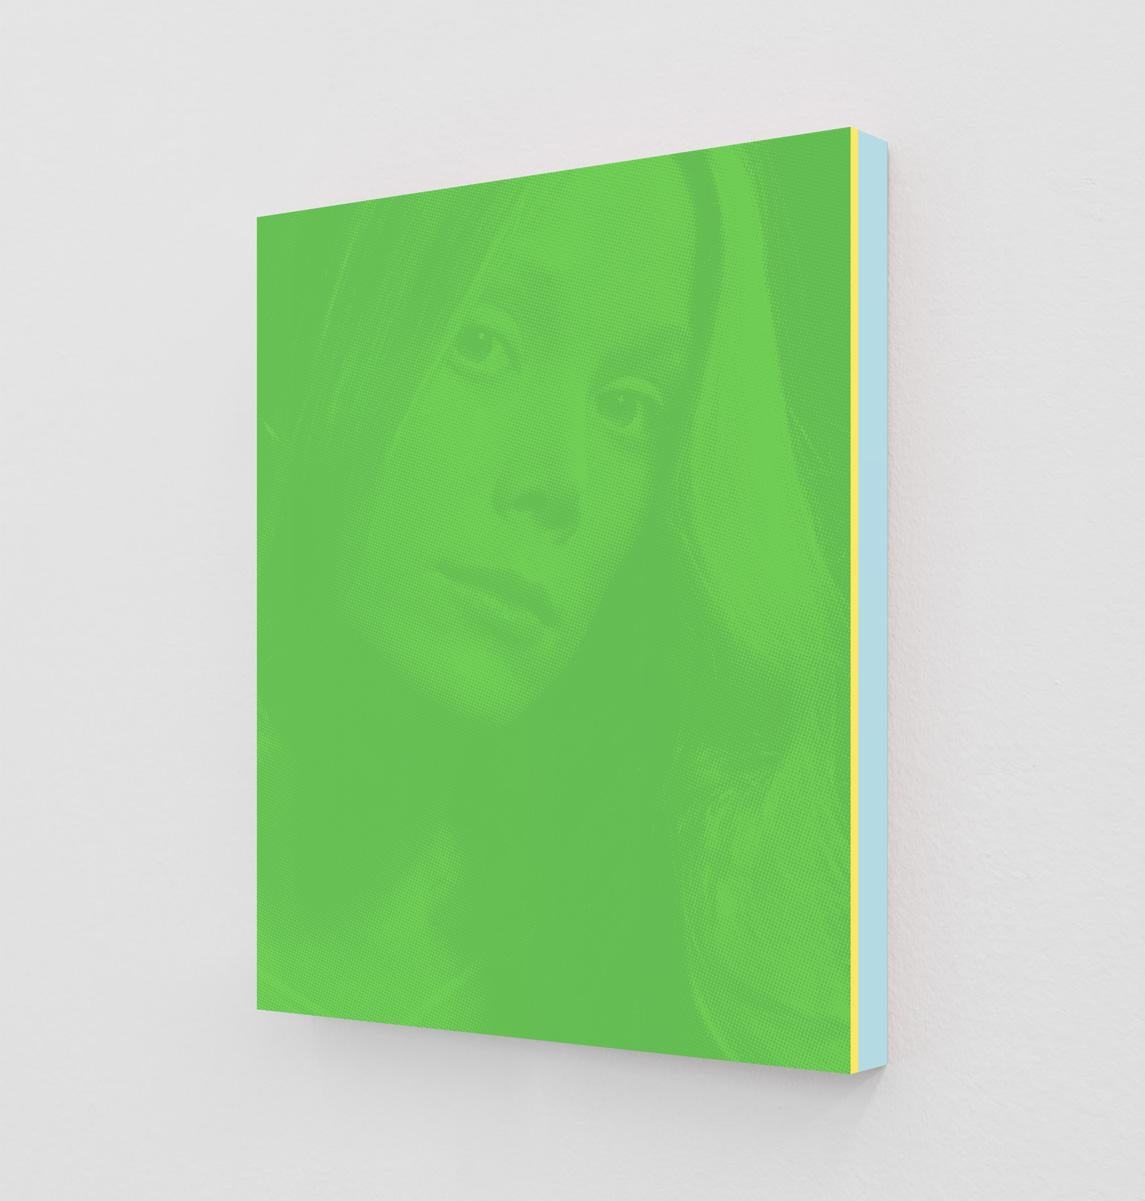 Sissy Spacek as Carrie (Electric Lime) - Photograph by Daniel Handal